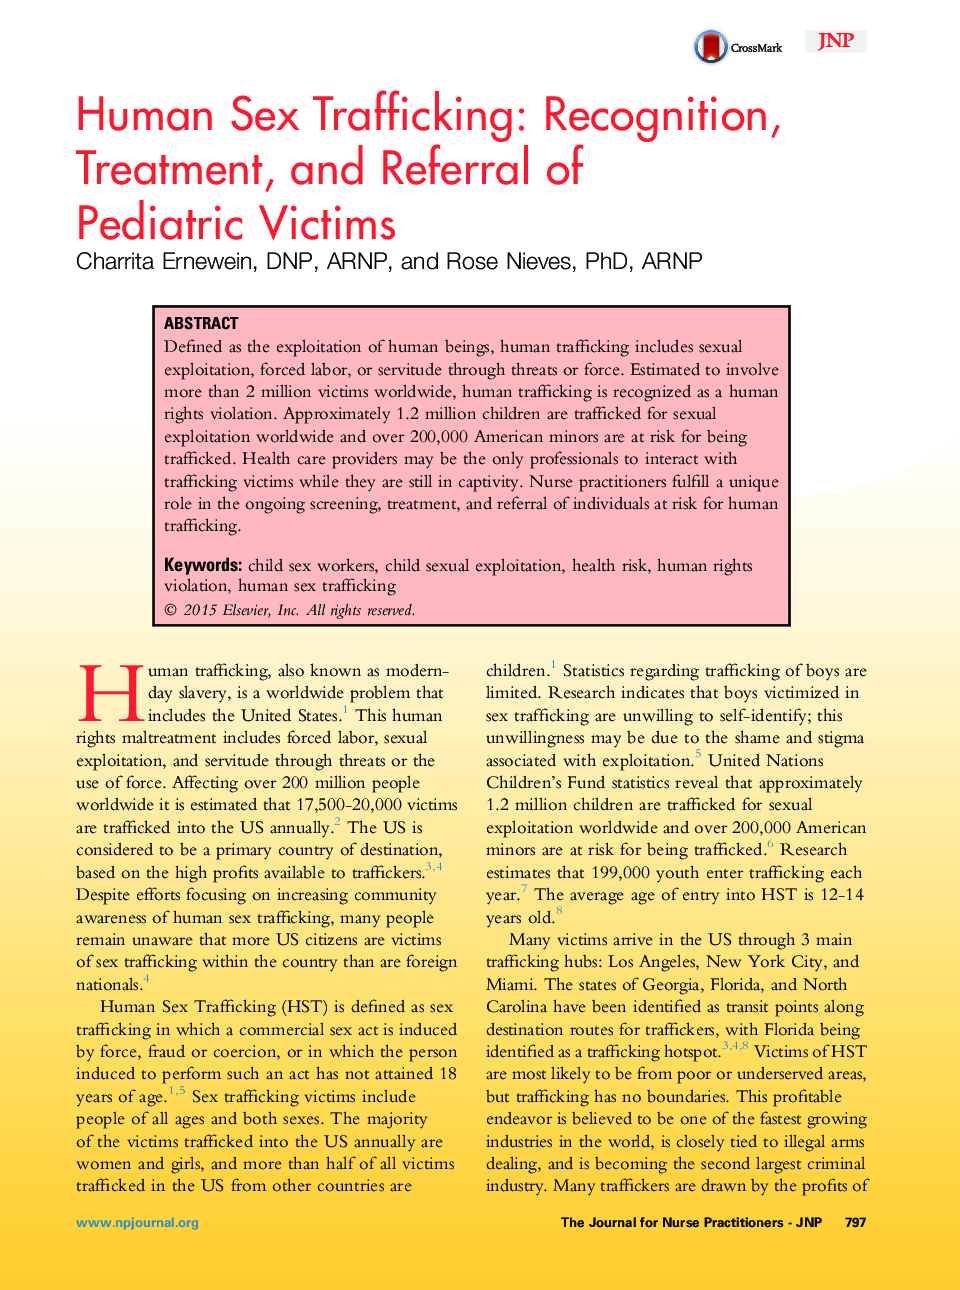 Human Sex Trafficking: Recognition, Treatment, and Referral of Pediatric Victims 